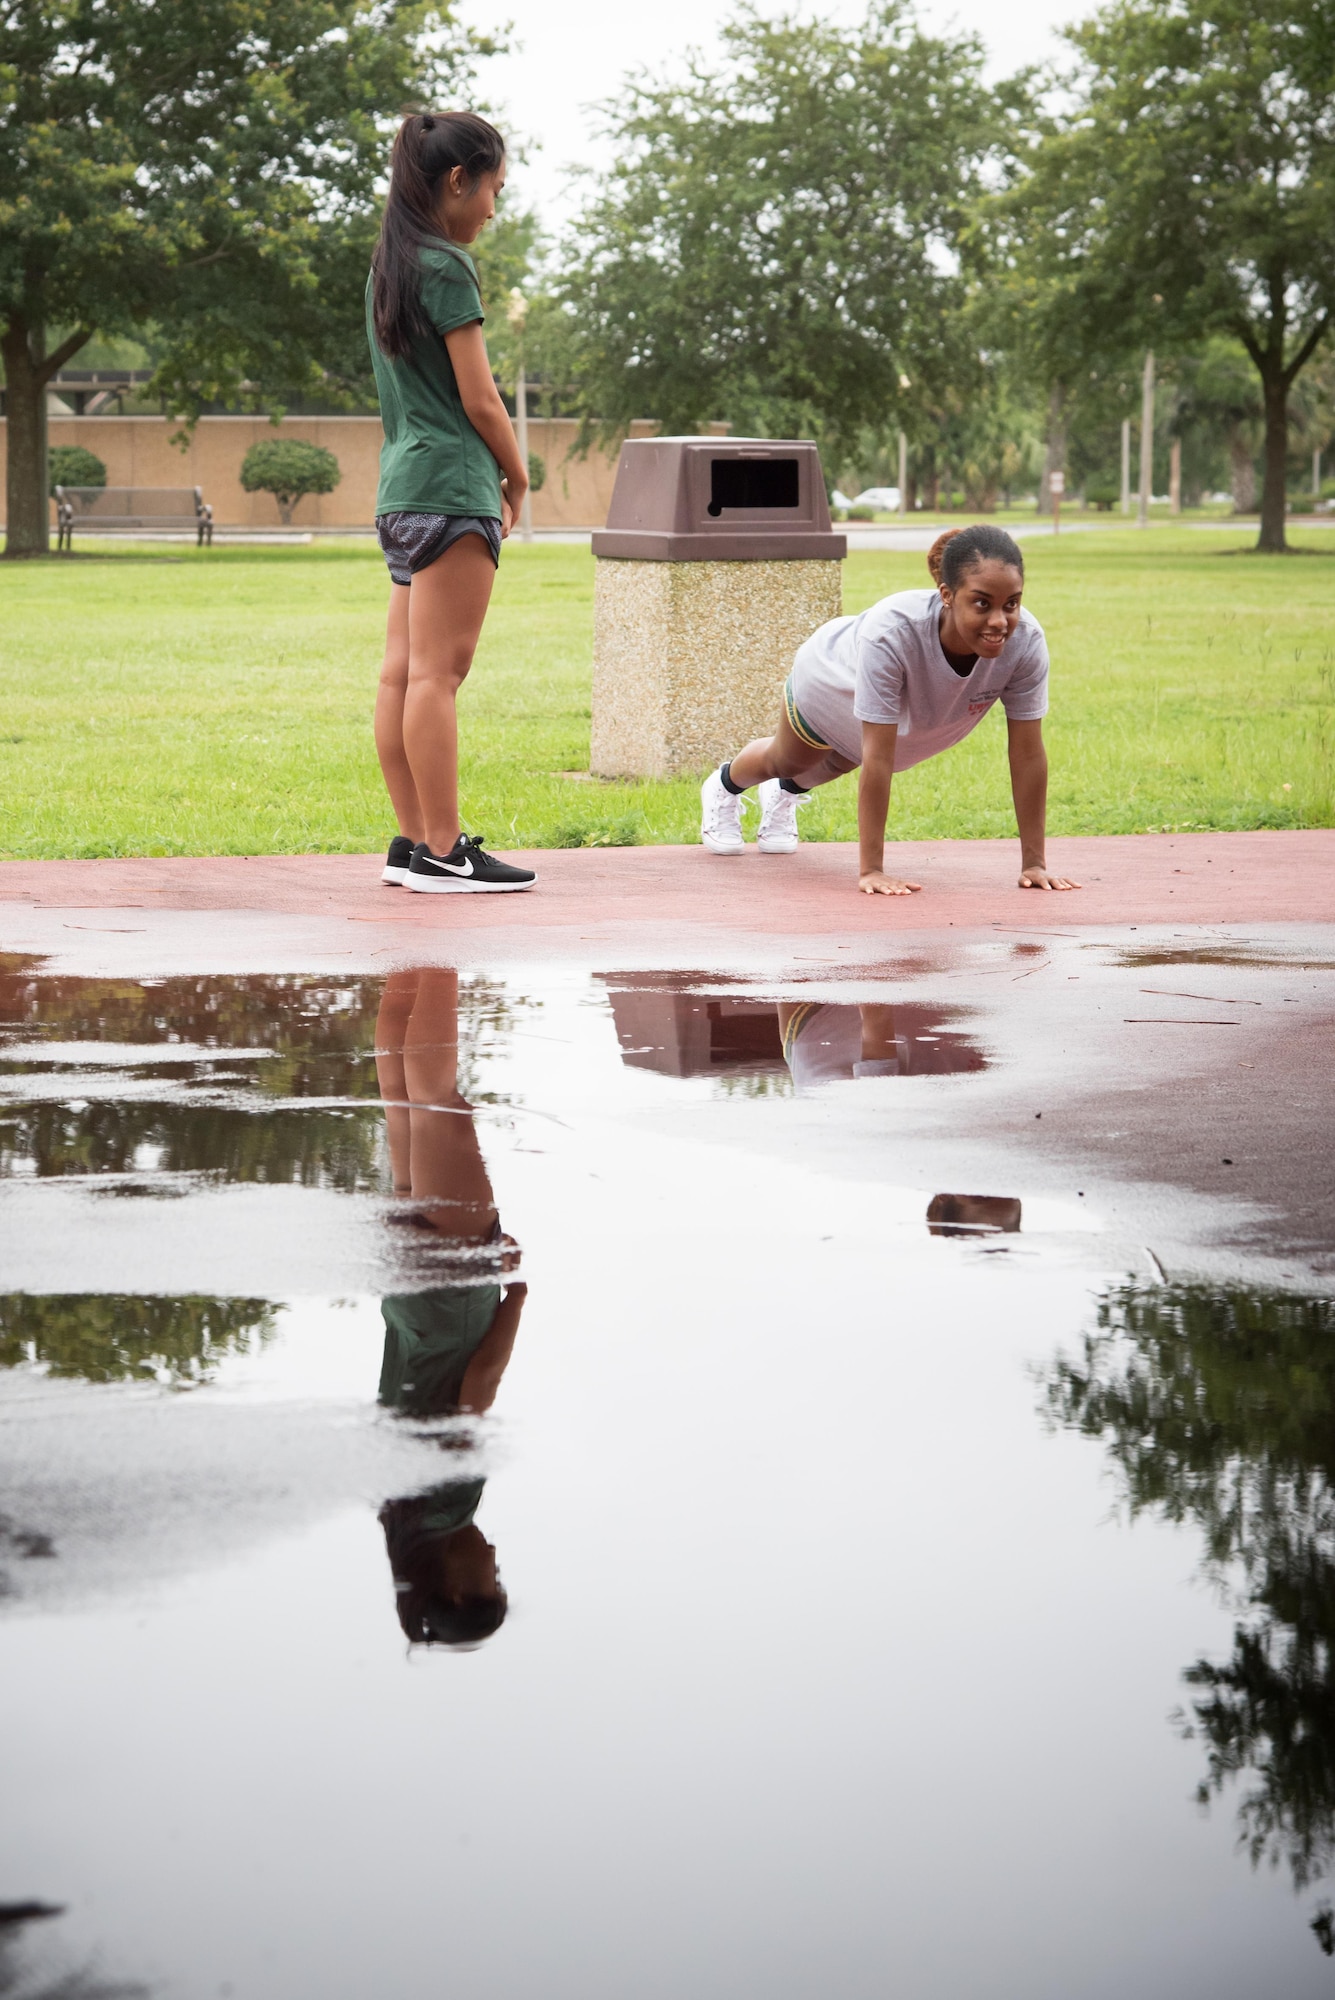 Makalya Averett, 403rd Developmental and Training Flight trainee pracices pushups during a physical training session June 3, 2017 at Keesler Air Force Base, Mississippi. (U.S. Air Force photo/Staff Sgt. Heather Heiney)